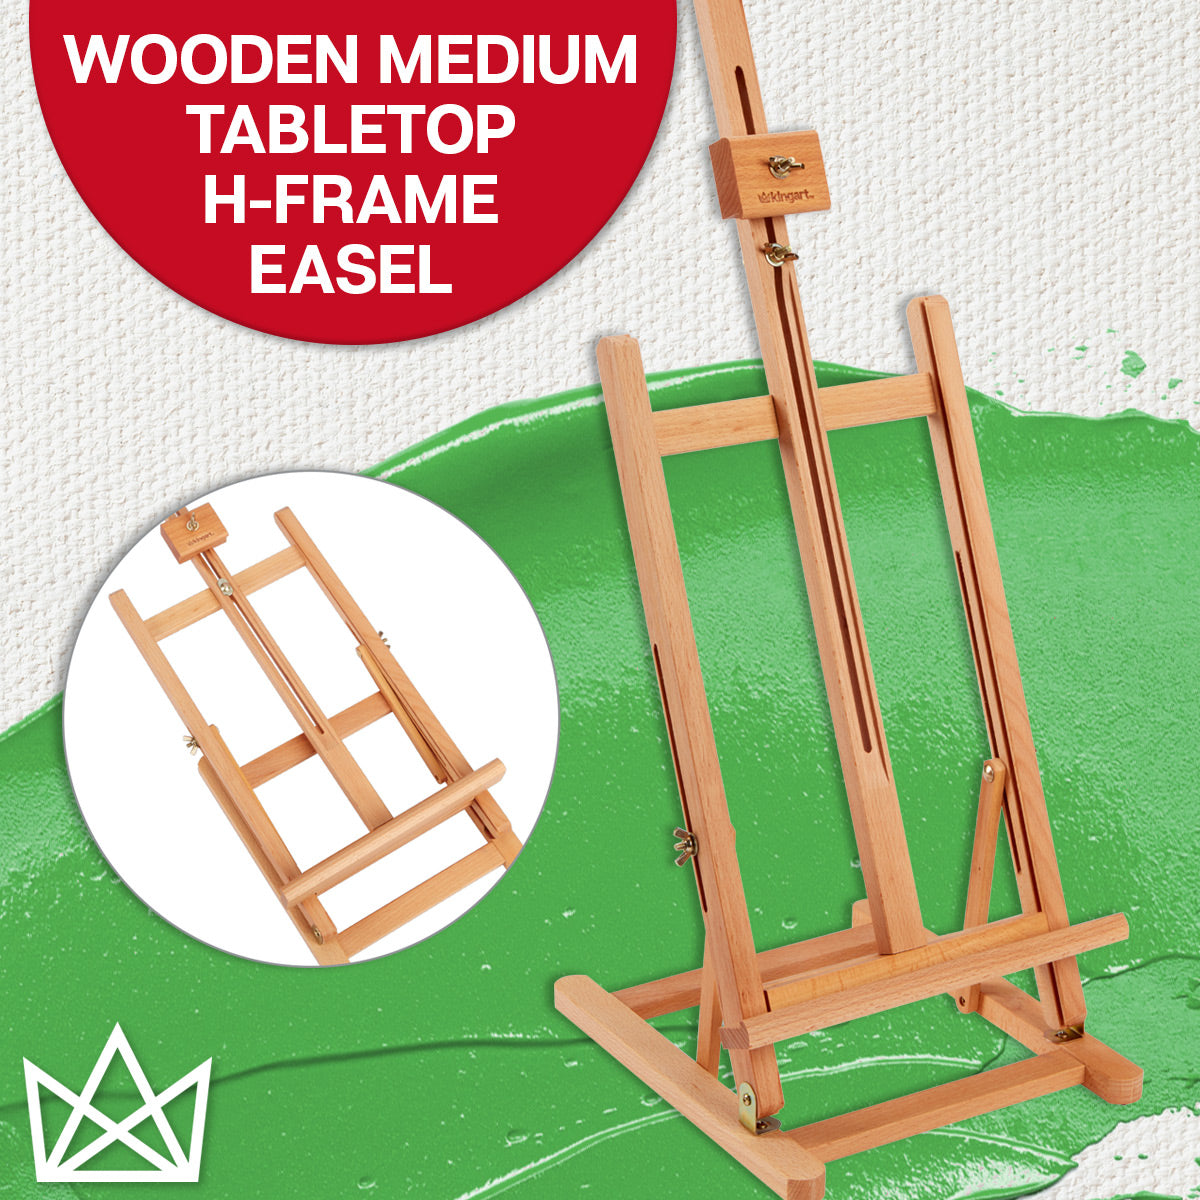 Daler-Rowney Simply Wooden Table Easel with Collapsible Base New In Box